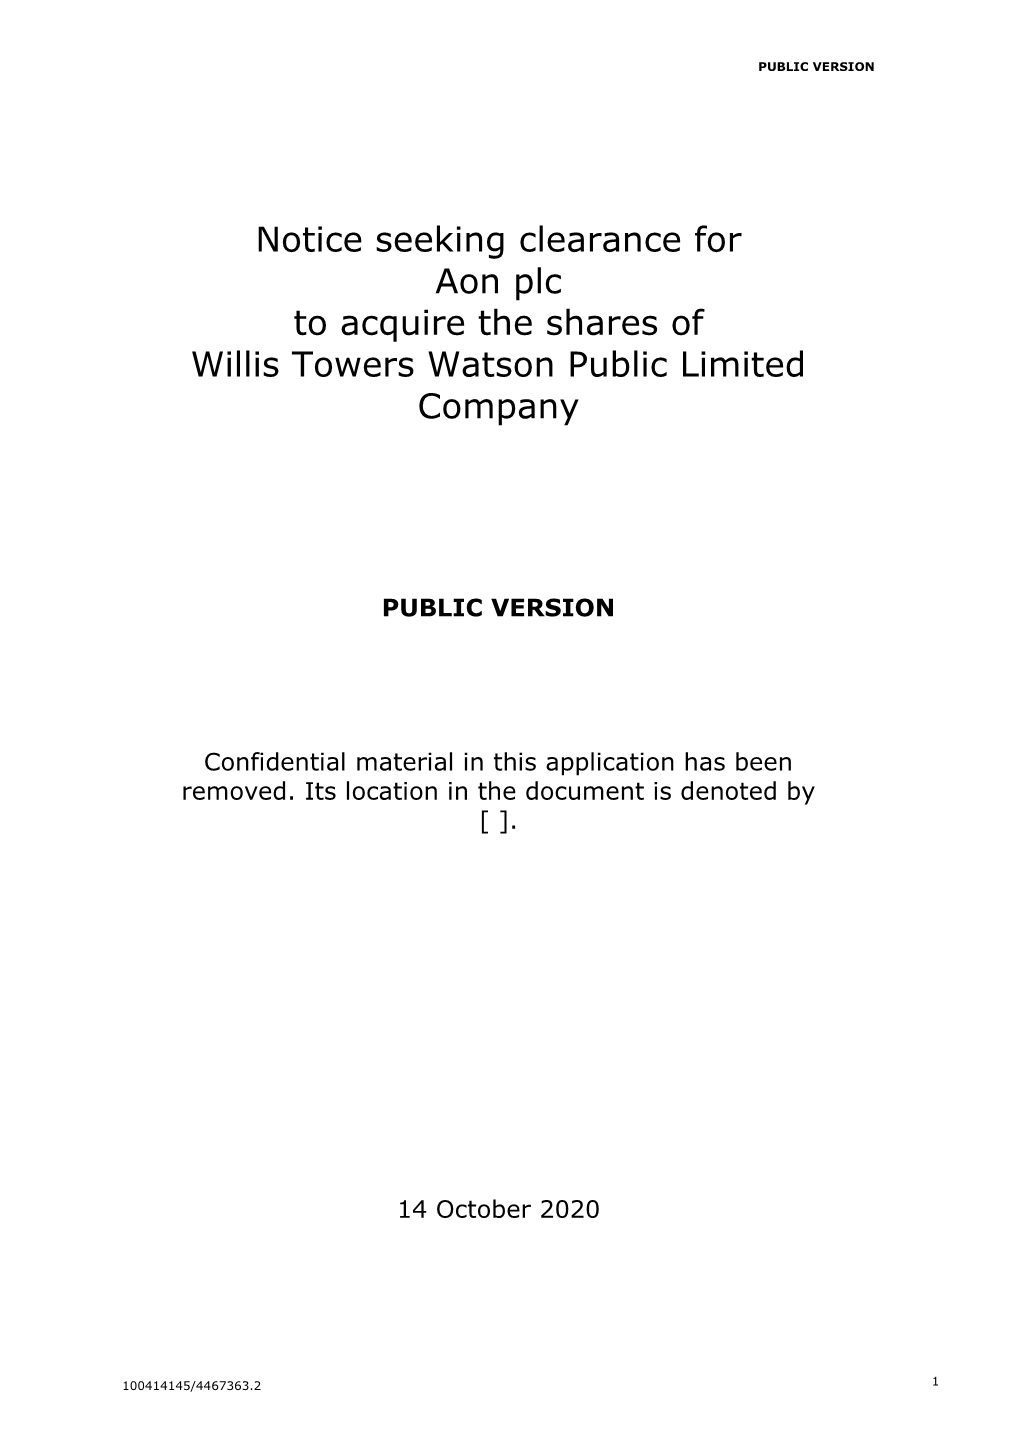 Aon Plc and Willis Towers Watson Public